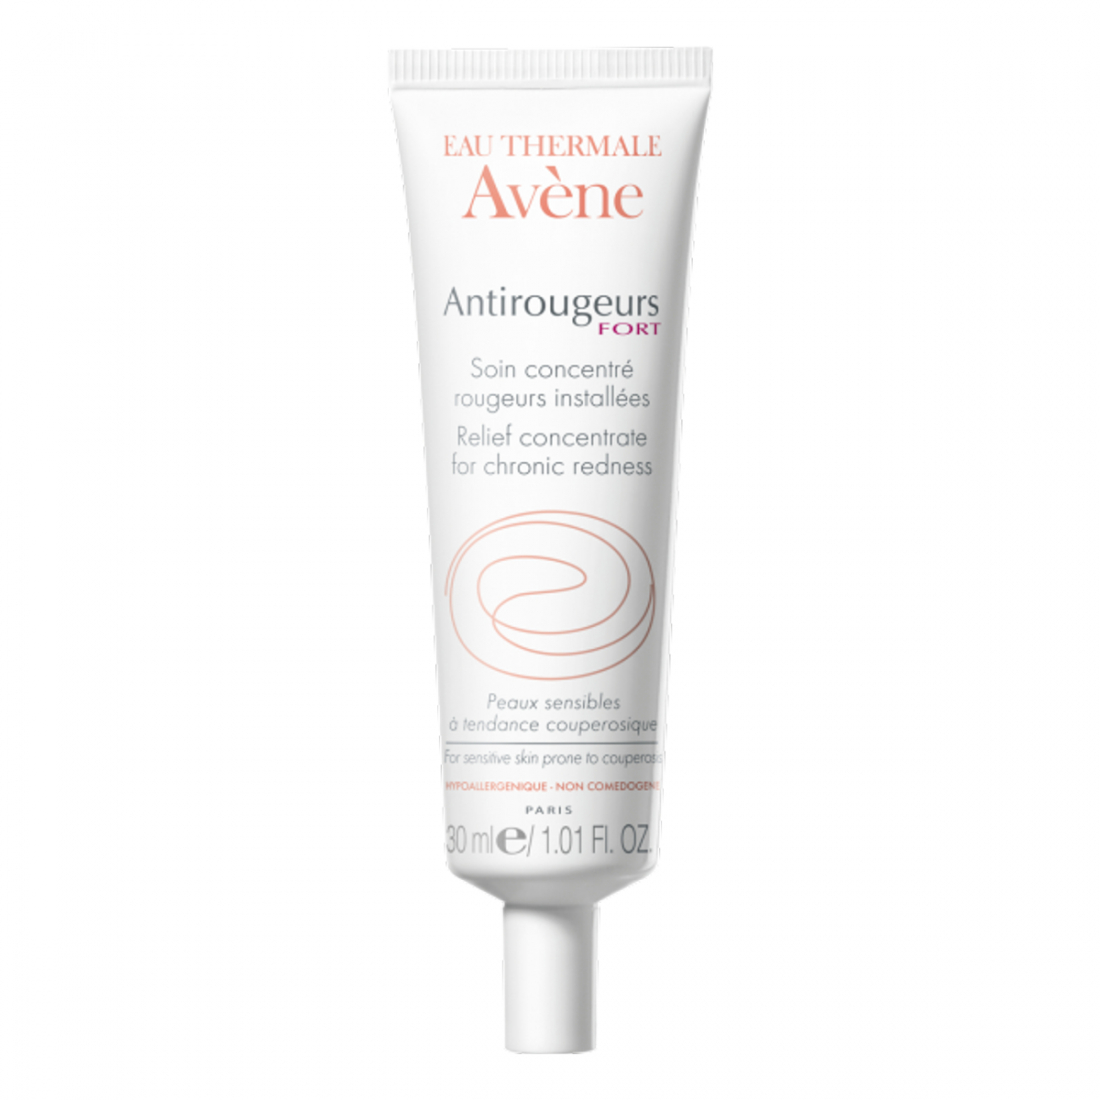 'Anti-Redness Fort Concentrated' Treatment Cream - 30 ml